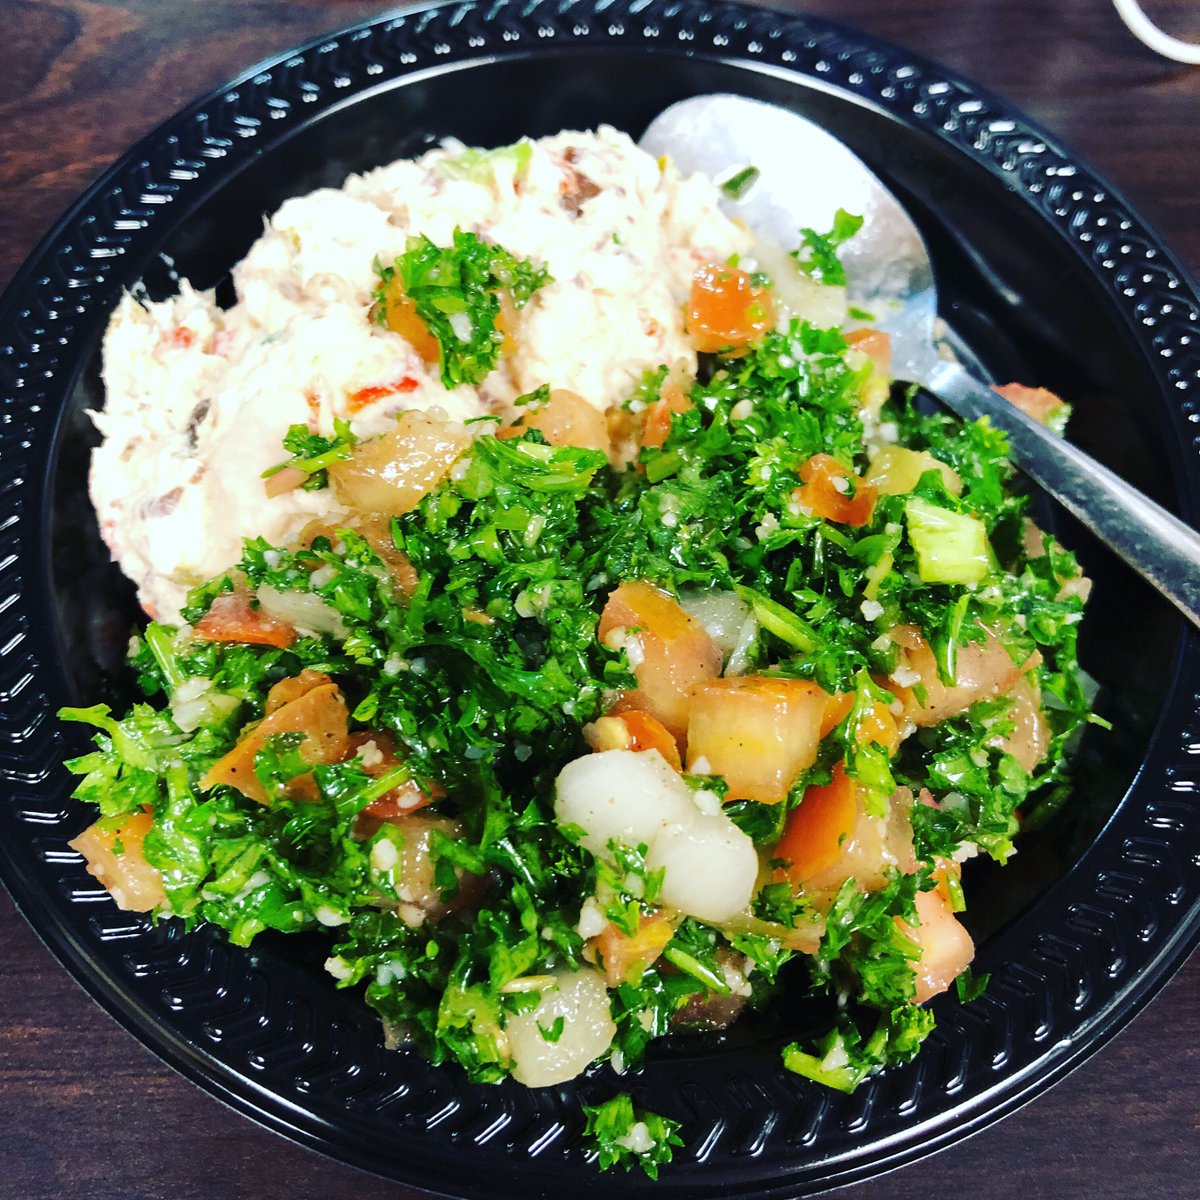 Fan repost. Mediterranean Tuna Salad and Tabouleh. Interesting mix from our Market location. What is your favorite Lebanese Taverna food remix? #whatisforlunch